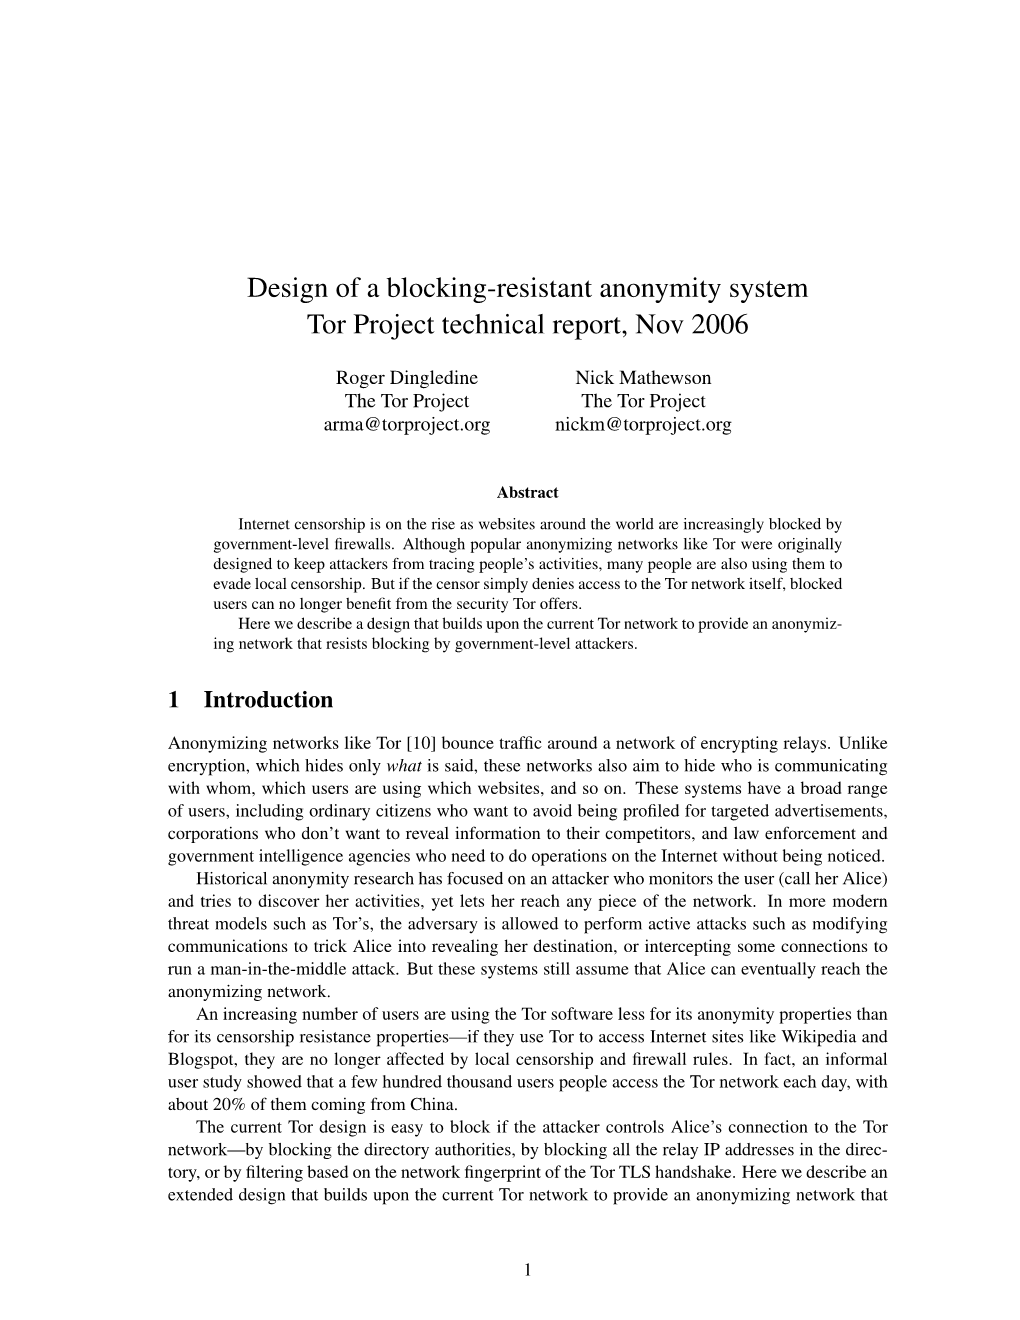 Design of a Blocking-Resistant Anonymity System Tor Project Technical Report, Nov 2006